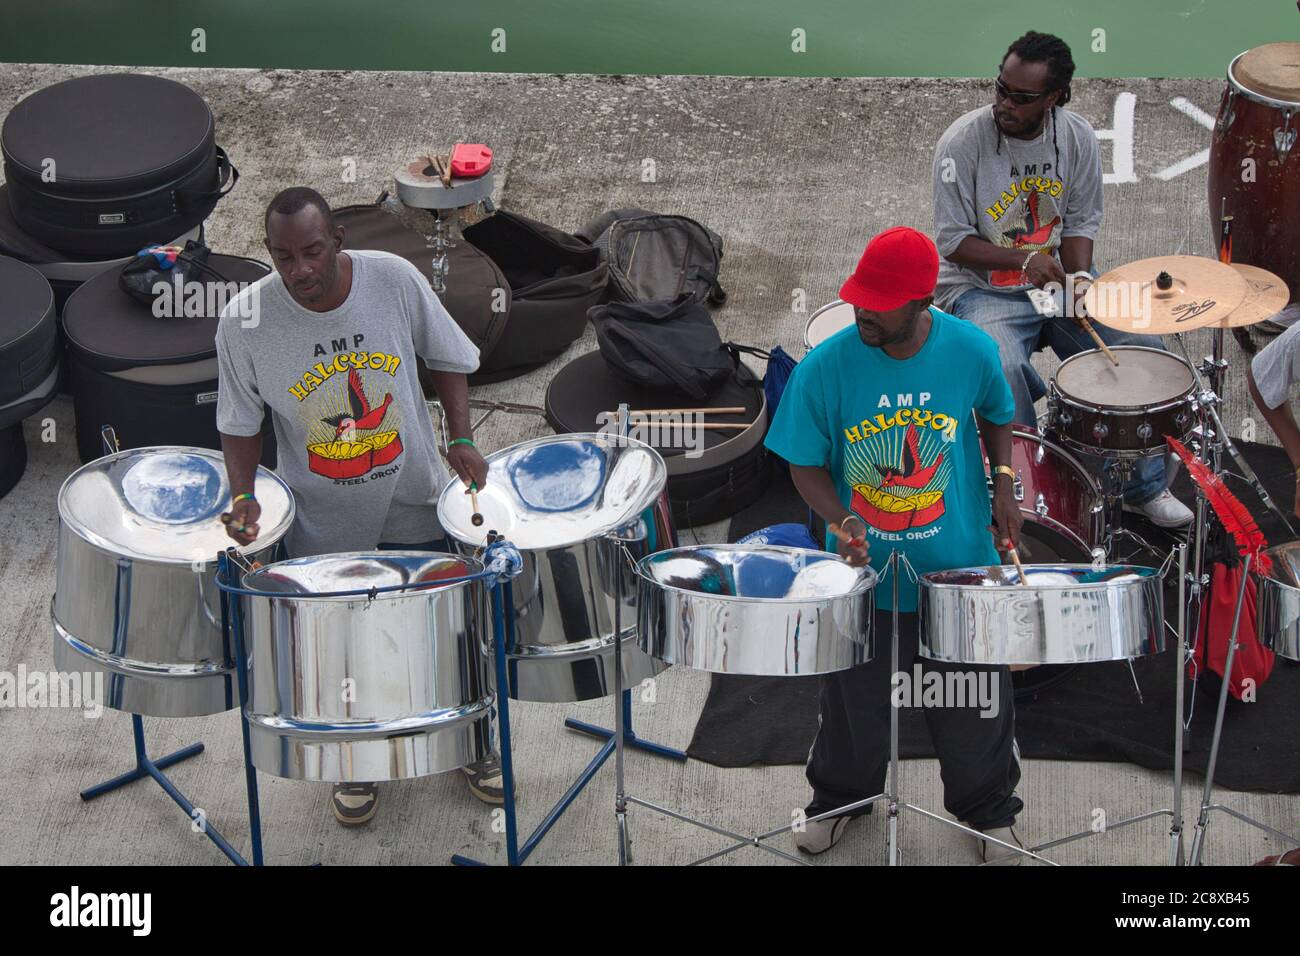 A steel band plays on the quayside for passengers on visiting cruise ships at St Johns, Antigua, The Caribbean, West Indies Stock Photo